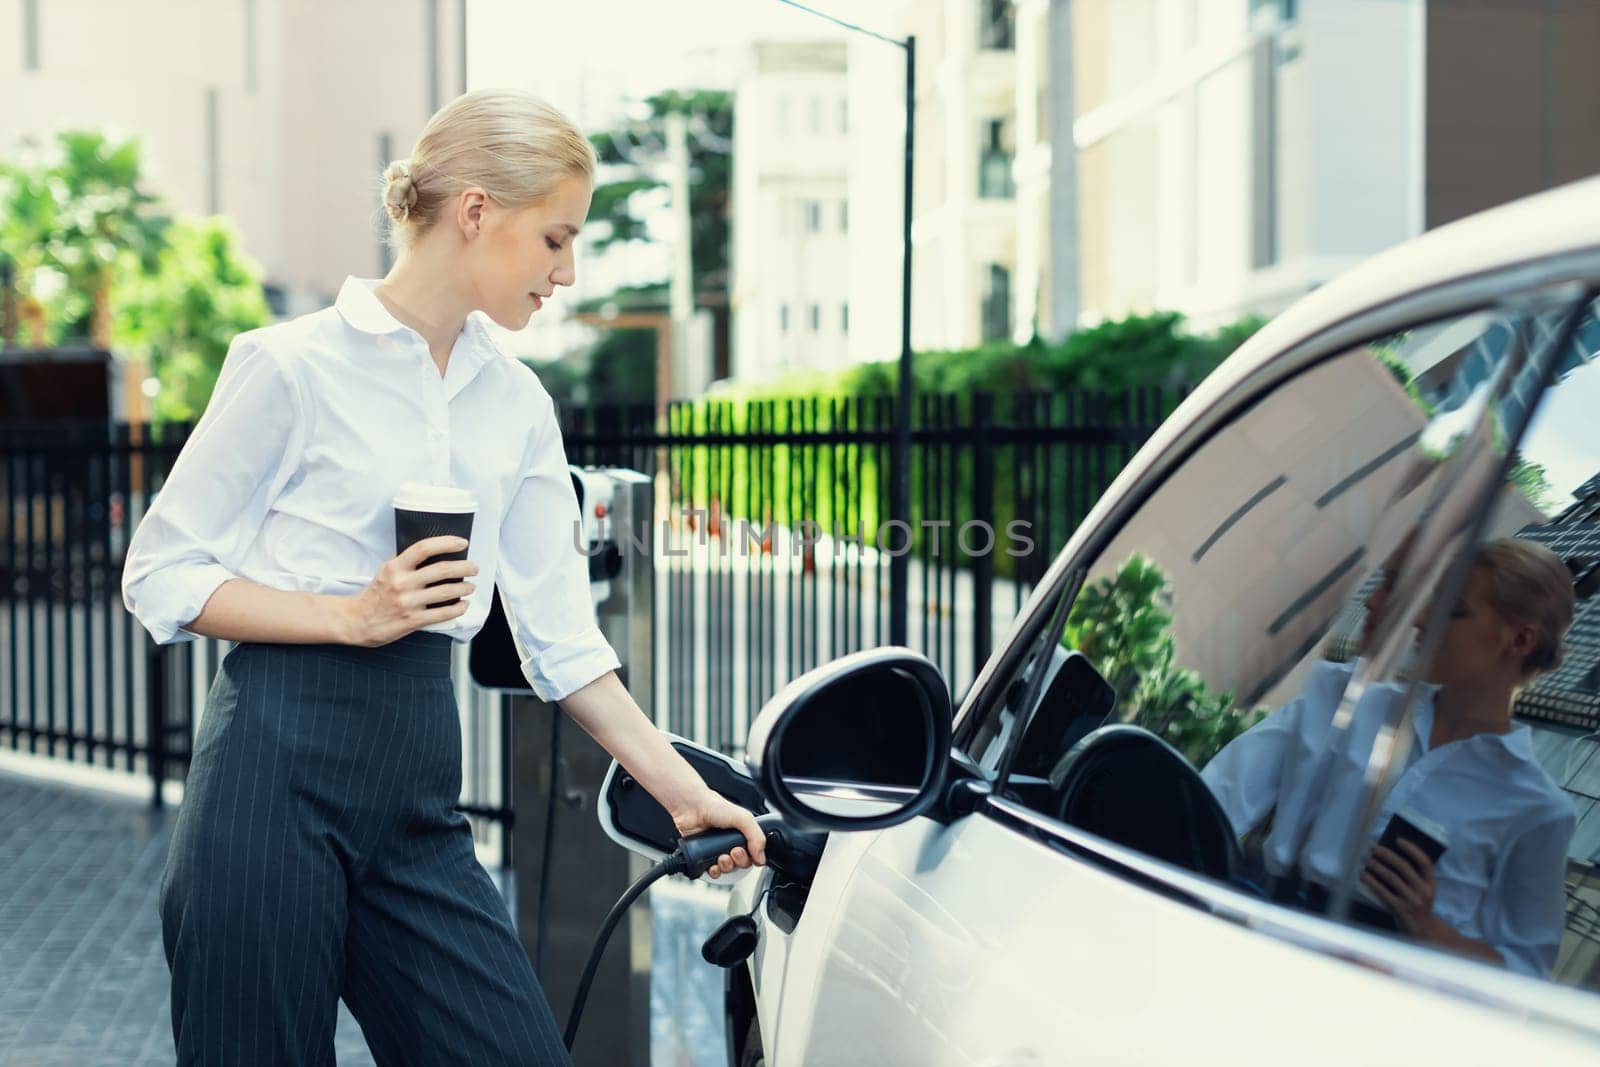 Businesswoman drinking coffee, leaning on electric vehicle recharging at public charging station with residential apartment condos building in background as progressive lifestyle by eco-friendly car.